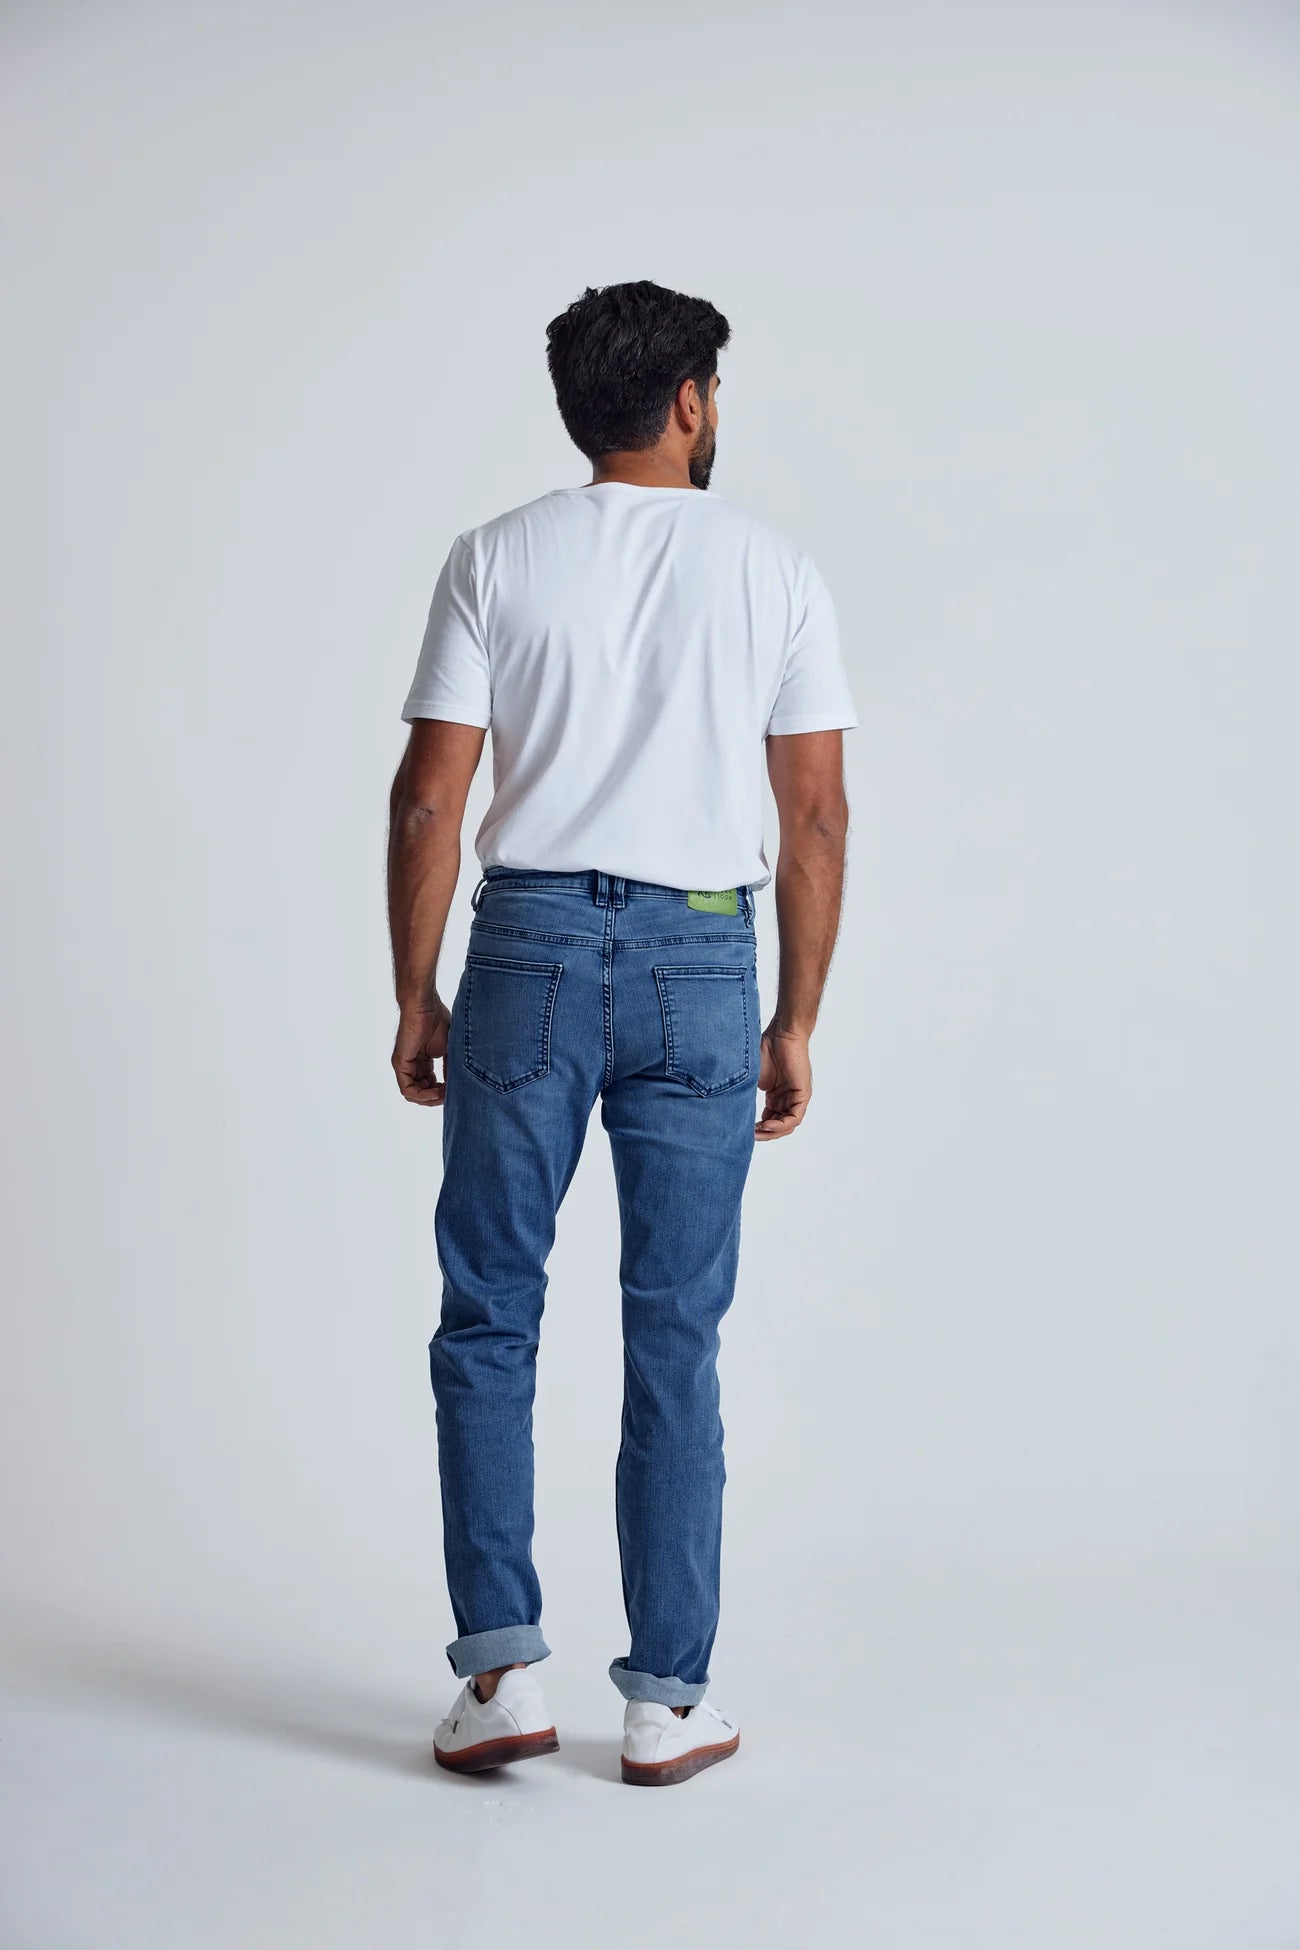 Azure Miles Slim Fit Jeans Long - GOTS Certified Organic Cotton and Recycled Polyester Long